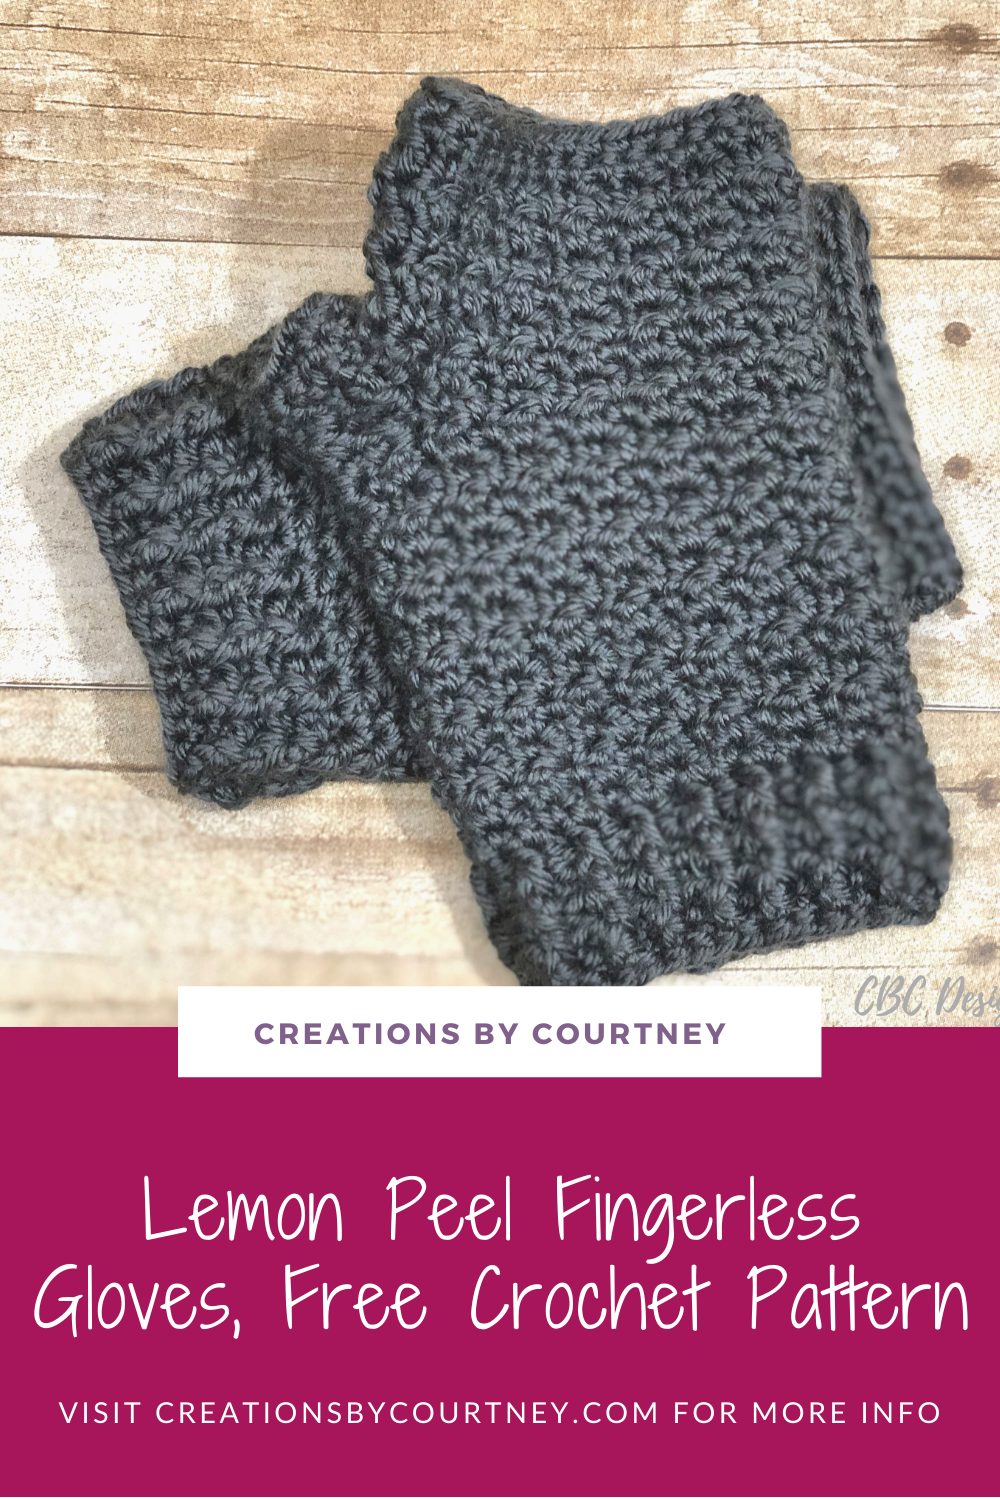 The Lemon Peel Fingerless Gloves crochet pattern is great for stash busting. This pattern is easy to adjust to fit your hand, and offers two options for making the thumb hole. Enjoy making this free crochet pattern! #creationsbycourtney #freecrochet #crochetgloves